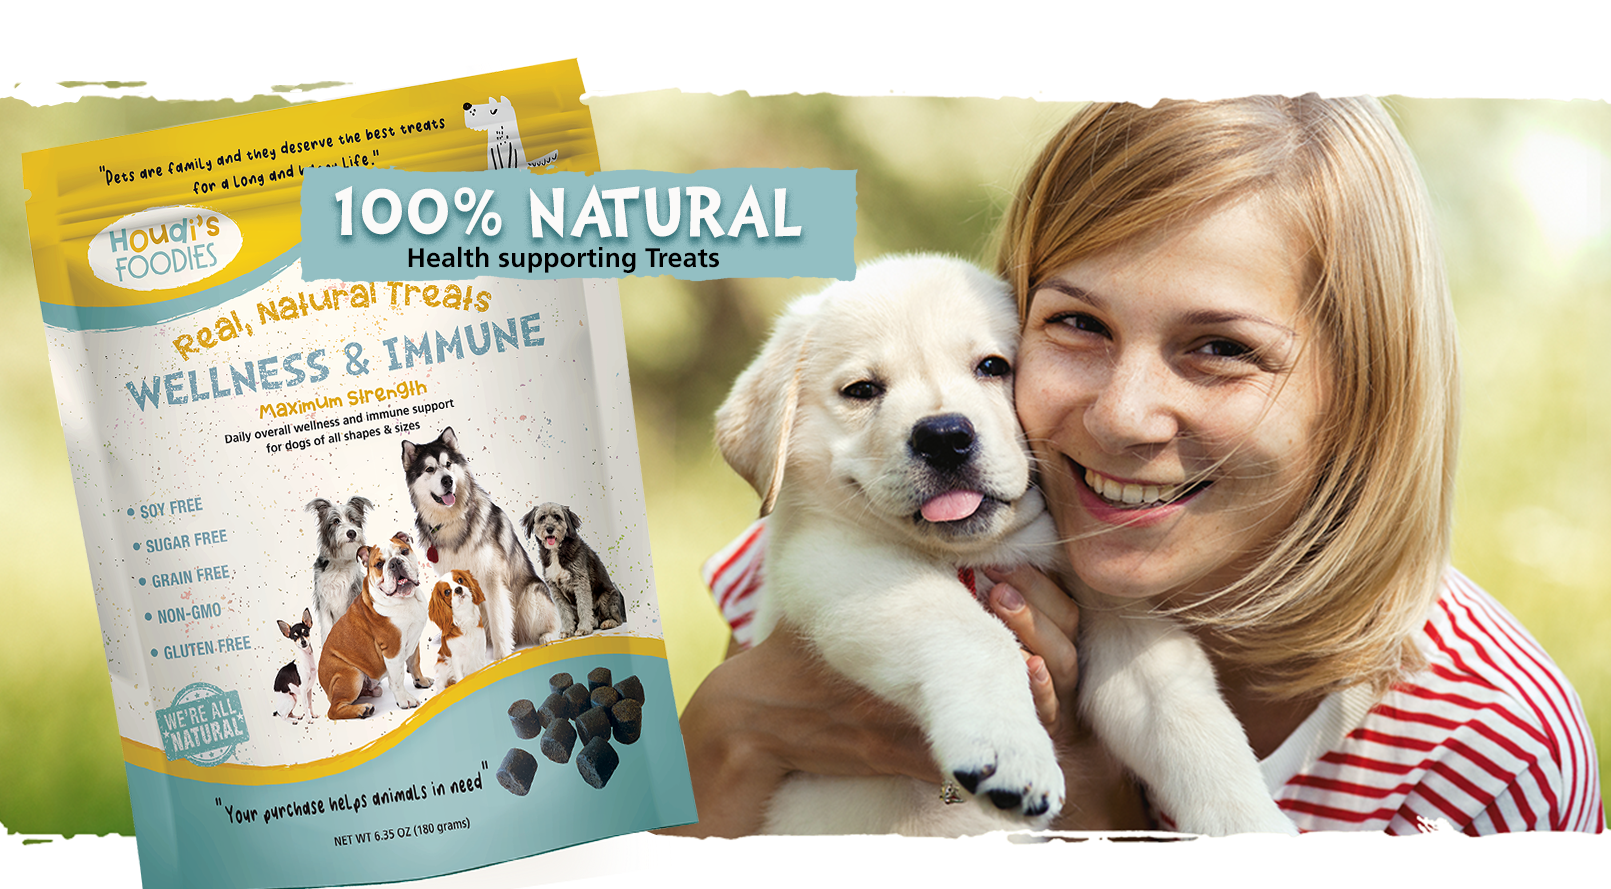 100% natural health supporting treats for dogs